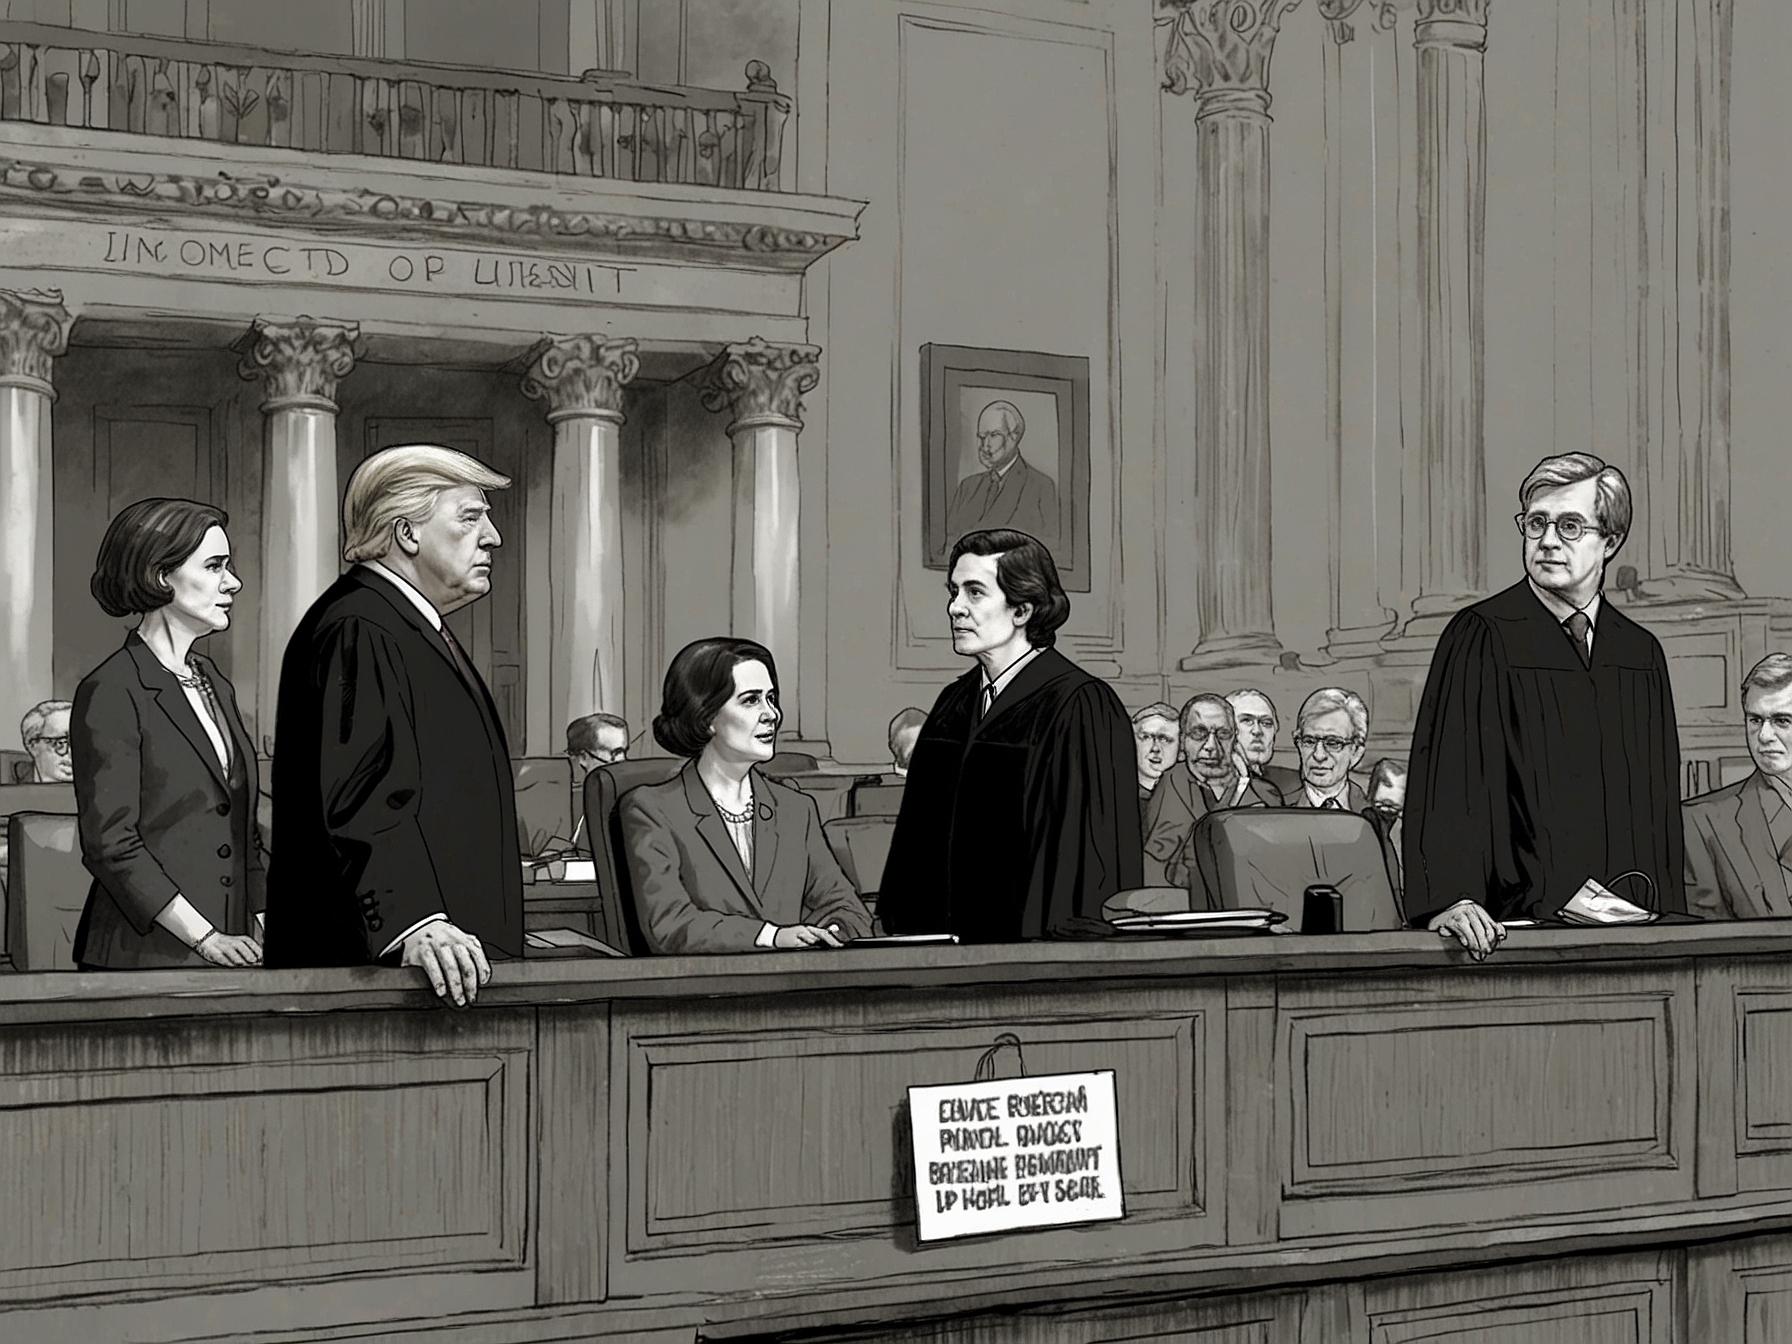 A courtroom scene illustrating the Supreme Court justices delivering their decision on Trump's immunity, signifying a critical advancement in the election interference case.